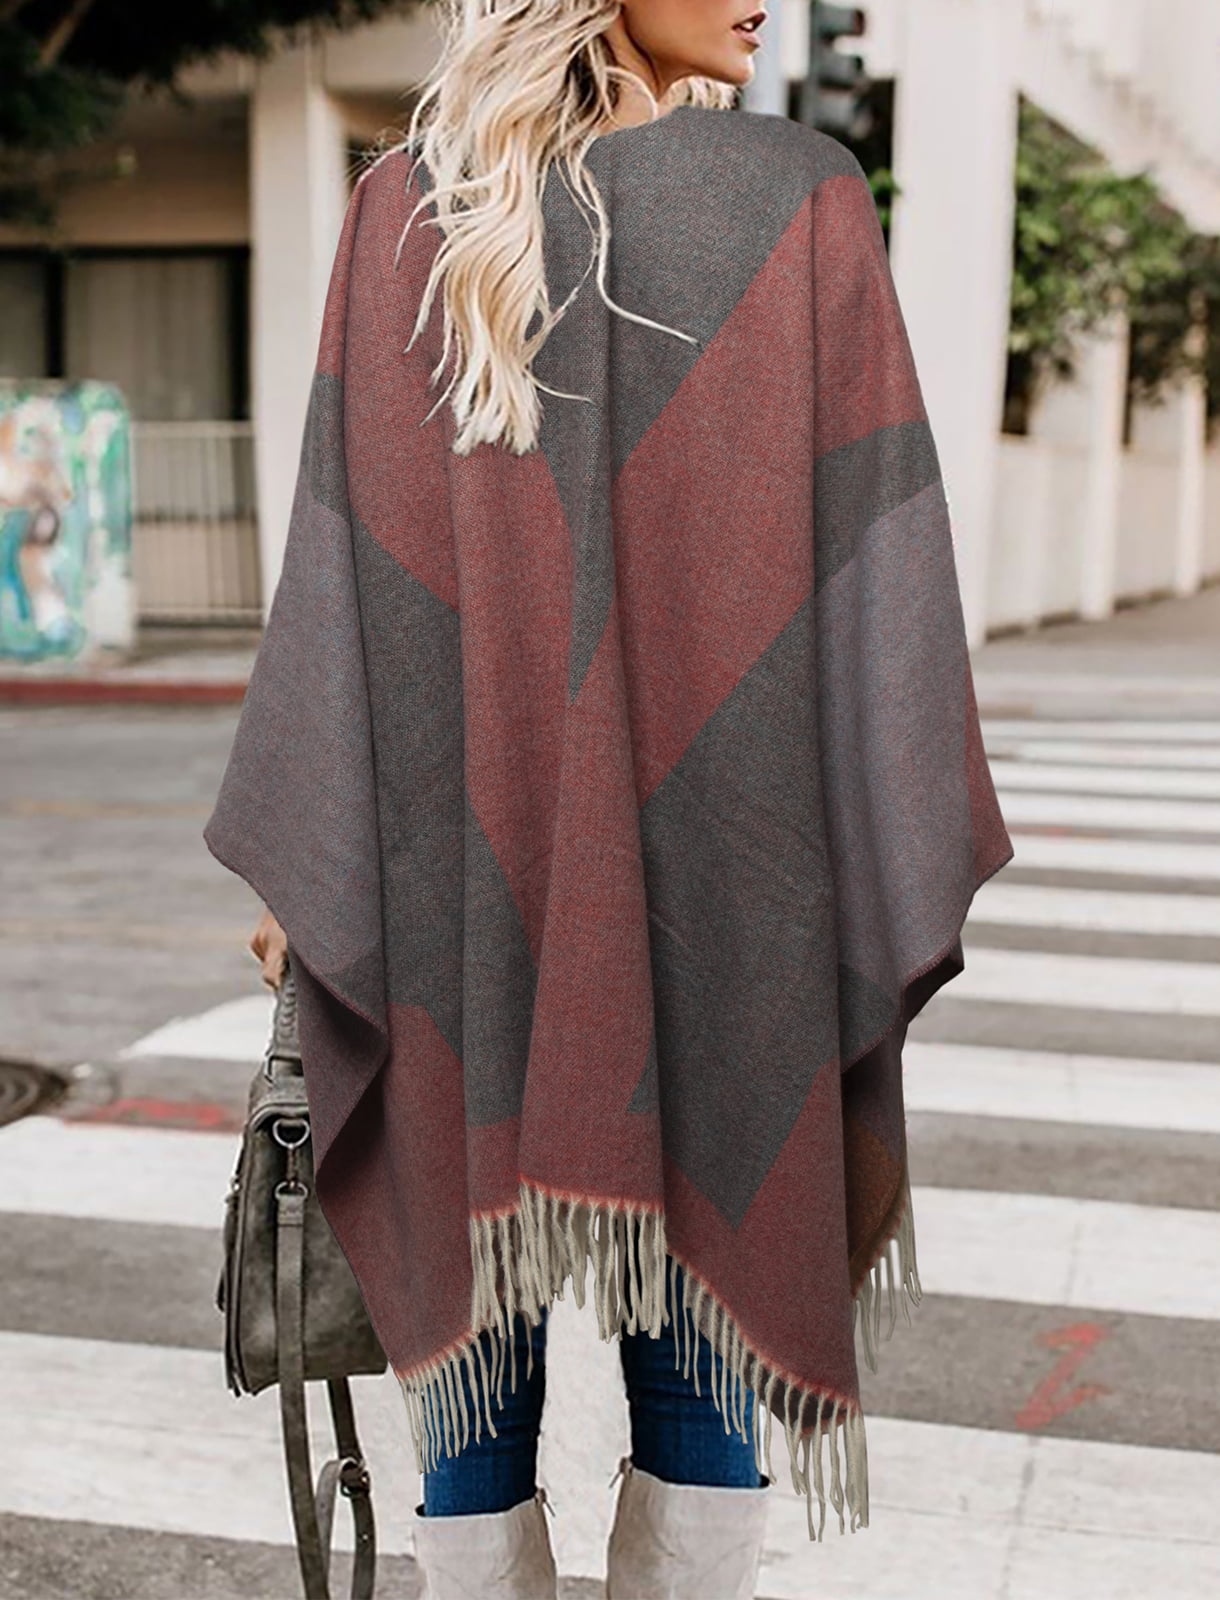 NoName Cape and poncho discount 63% Brown Single WOMEN FASHION Coats Knitted 